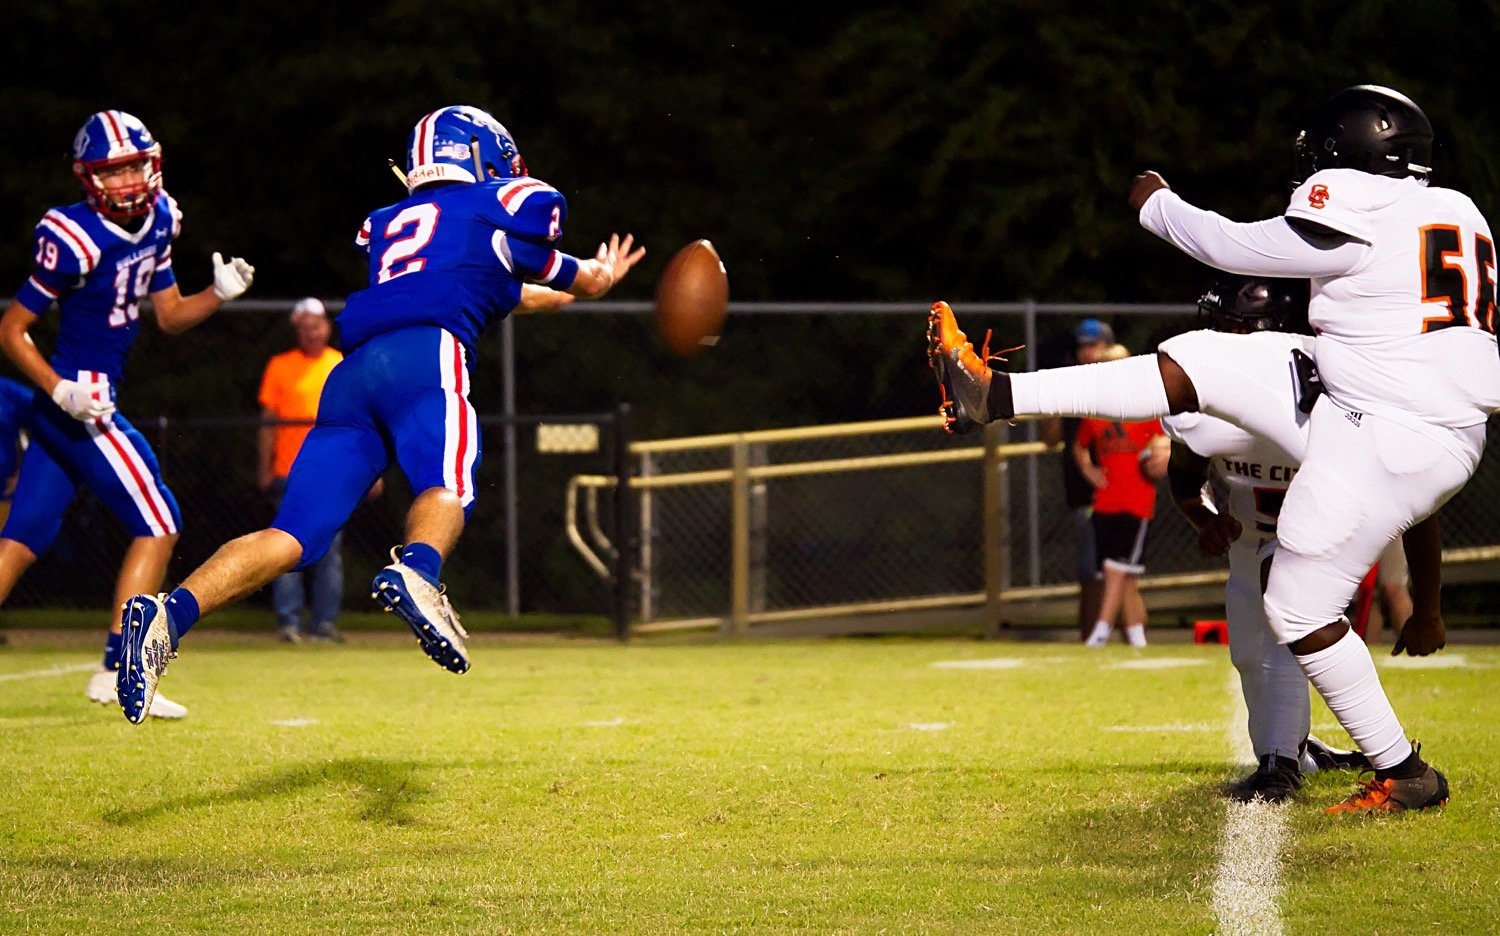 Ford Tannebaum blocks an extra point for Quitman Friday night against Queen City. The Bulldogs fell 65-13 in the homecoming game.